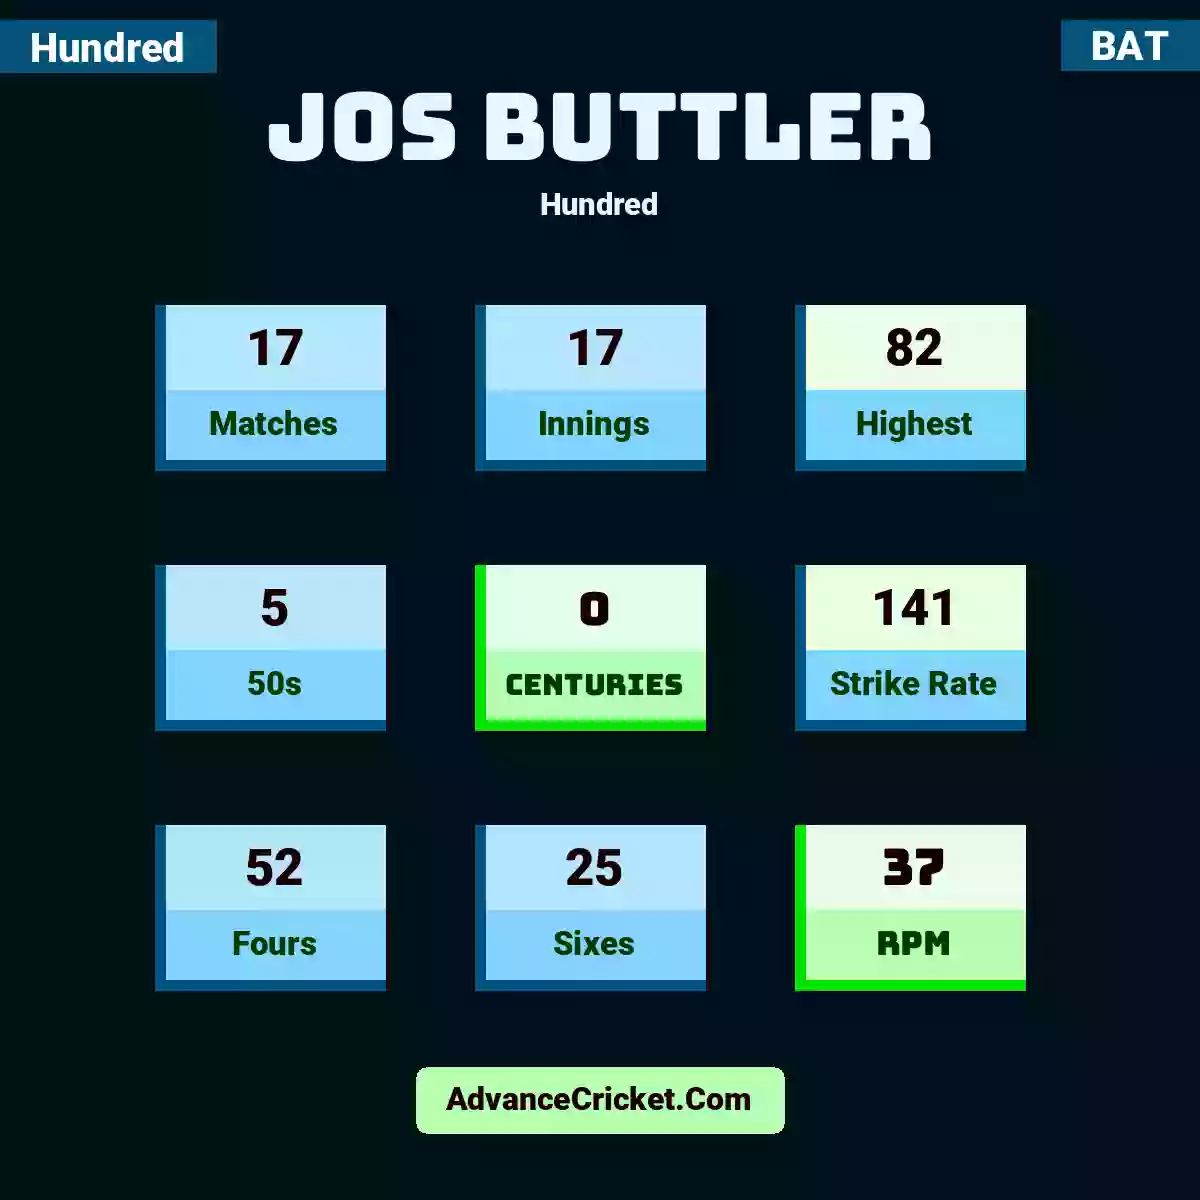 Jos Buttler Hundred , Jos Buttler played 17 matches, scored 82 runs as highest, 5 half-centuries, and 0 centuries, with a strike rate of 141. J.Buttler hit 52 fours and 25 sixes, with an RPM of 37.